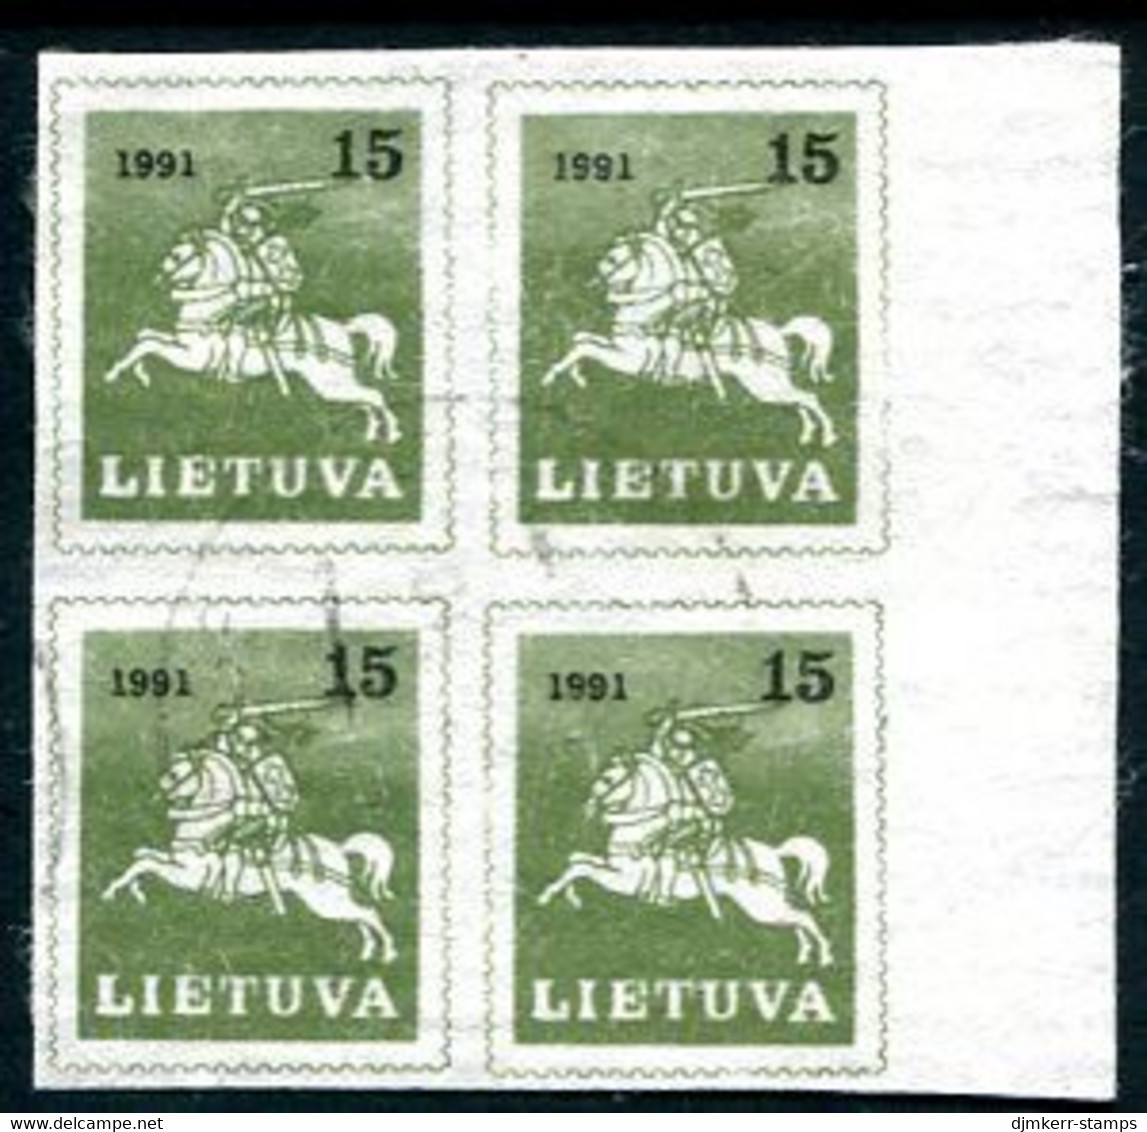 LITHUANIA 1991  Lithuanian Knight Definitive Imperforate Block Of 4 Used.  Michel 472 - Lithuania